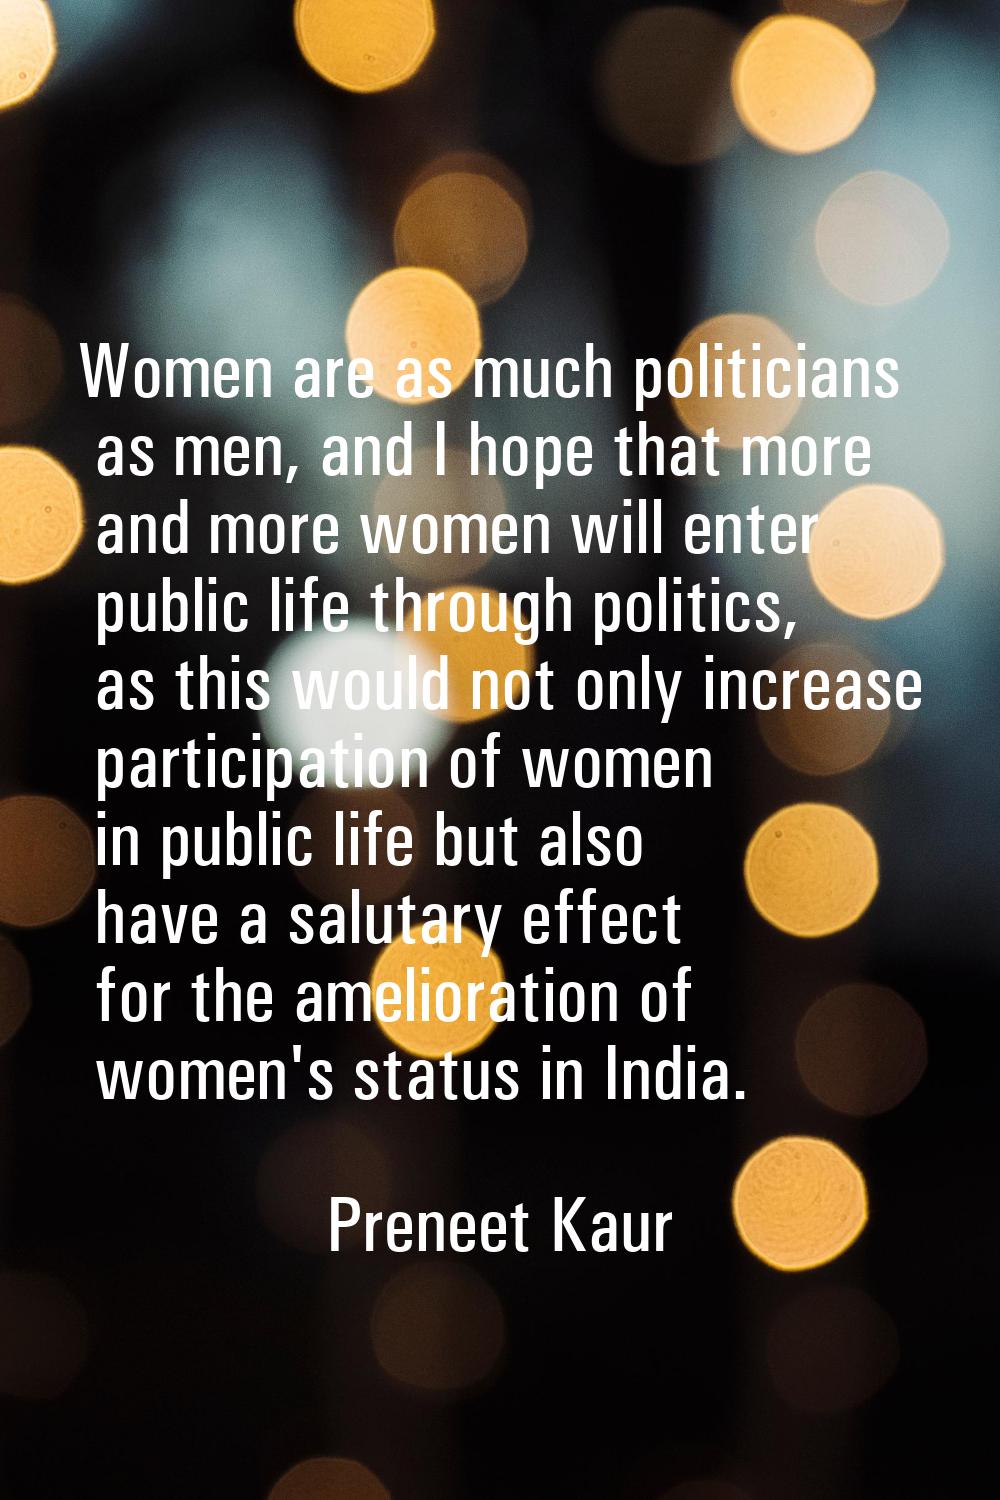 Women are as much politicians as men, and I hope that more and more women will enter public life th